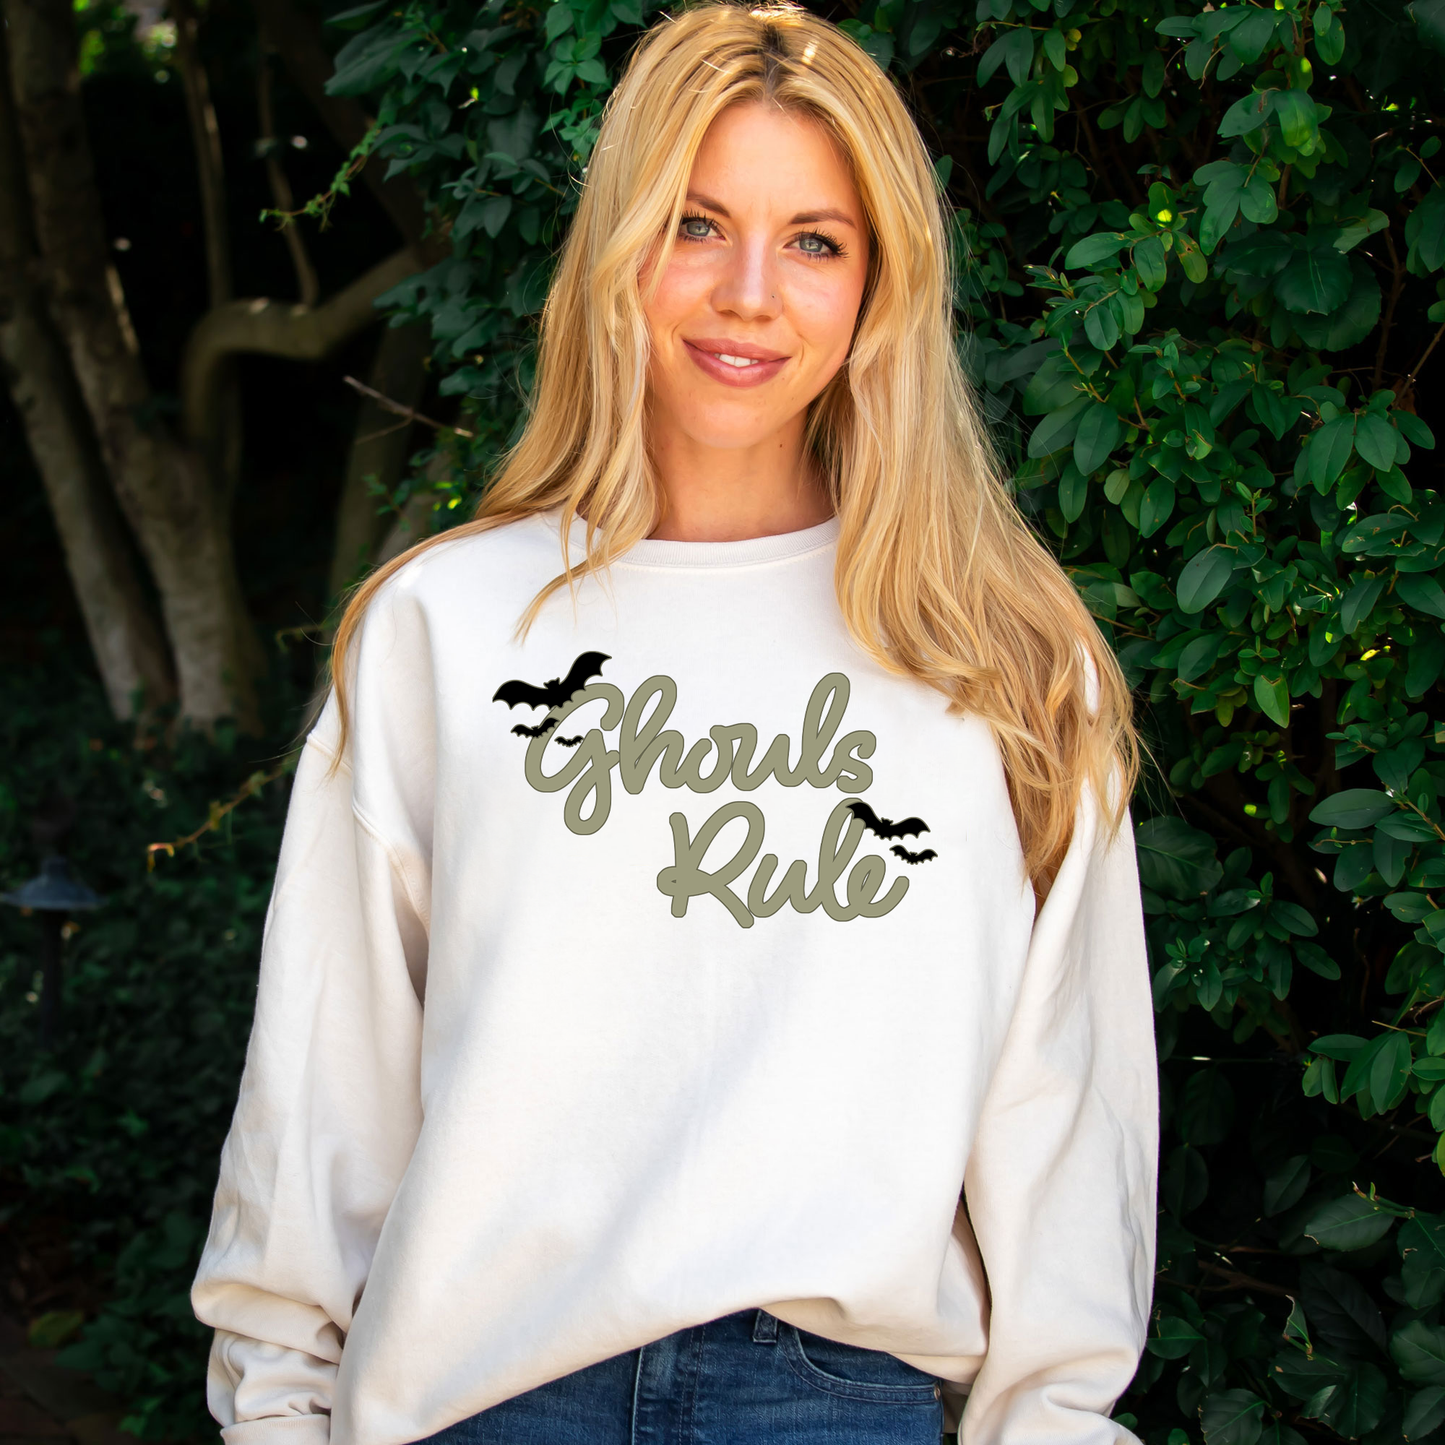 woman wearing an oversized cream sweatshirt with a cute ghouls rule print with bats